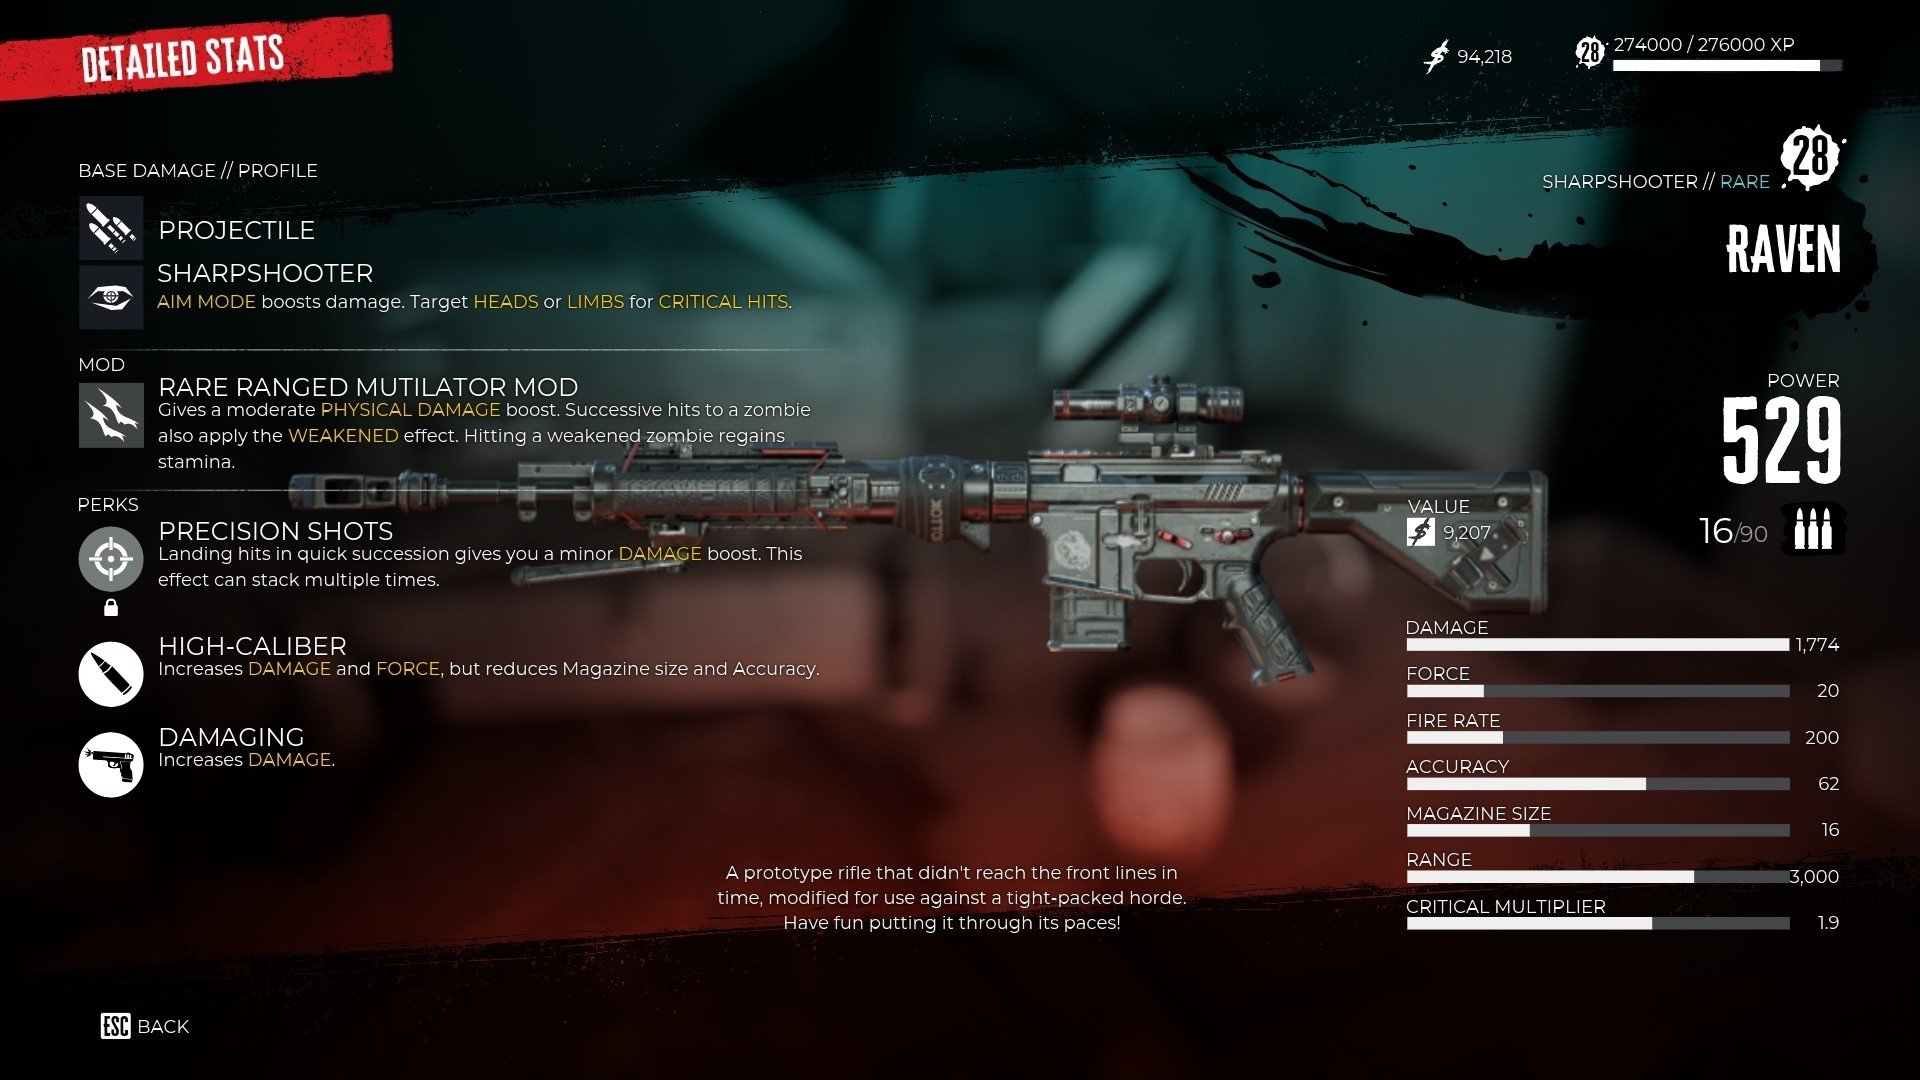 Screenshot of the Dead Island 2 menu showing a crudely modified modern military rifle in the center surrounded by boxes containing detailed statistical information about the weapon. 